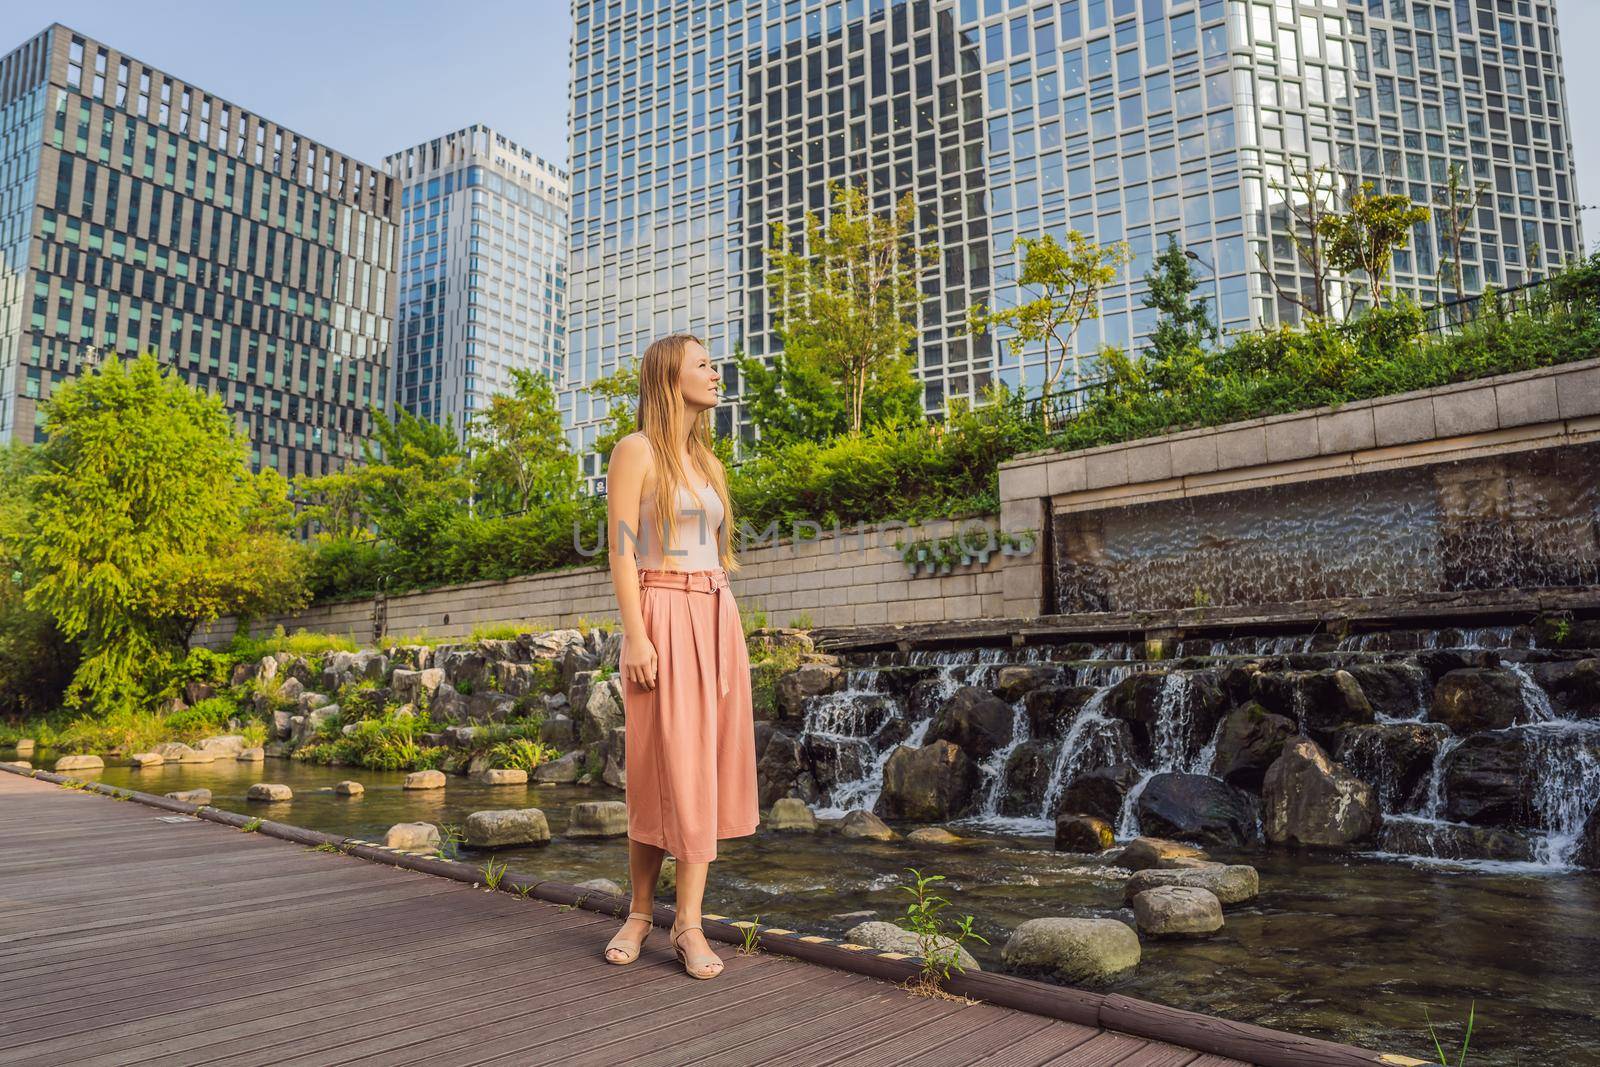 Young woman tourist in Cheonggyecheon stream in Seoul, Korea. Cheonggyecheon stream is the result of a massive urban renewal project. Travel to Korea Concept.